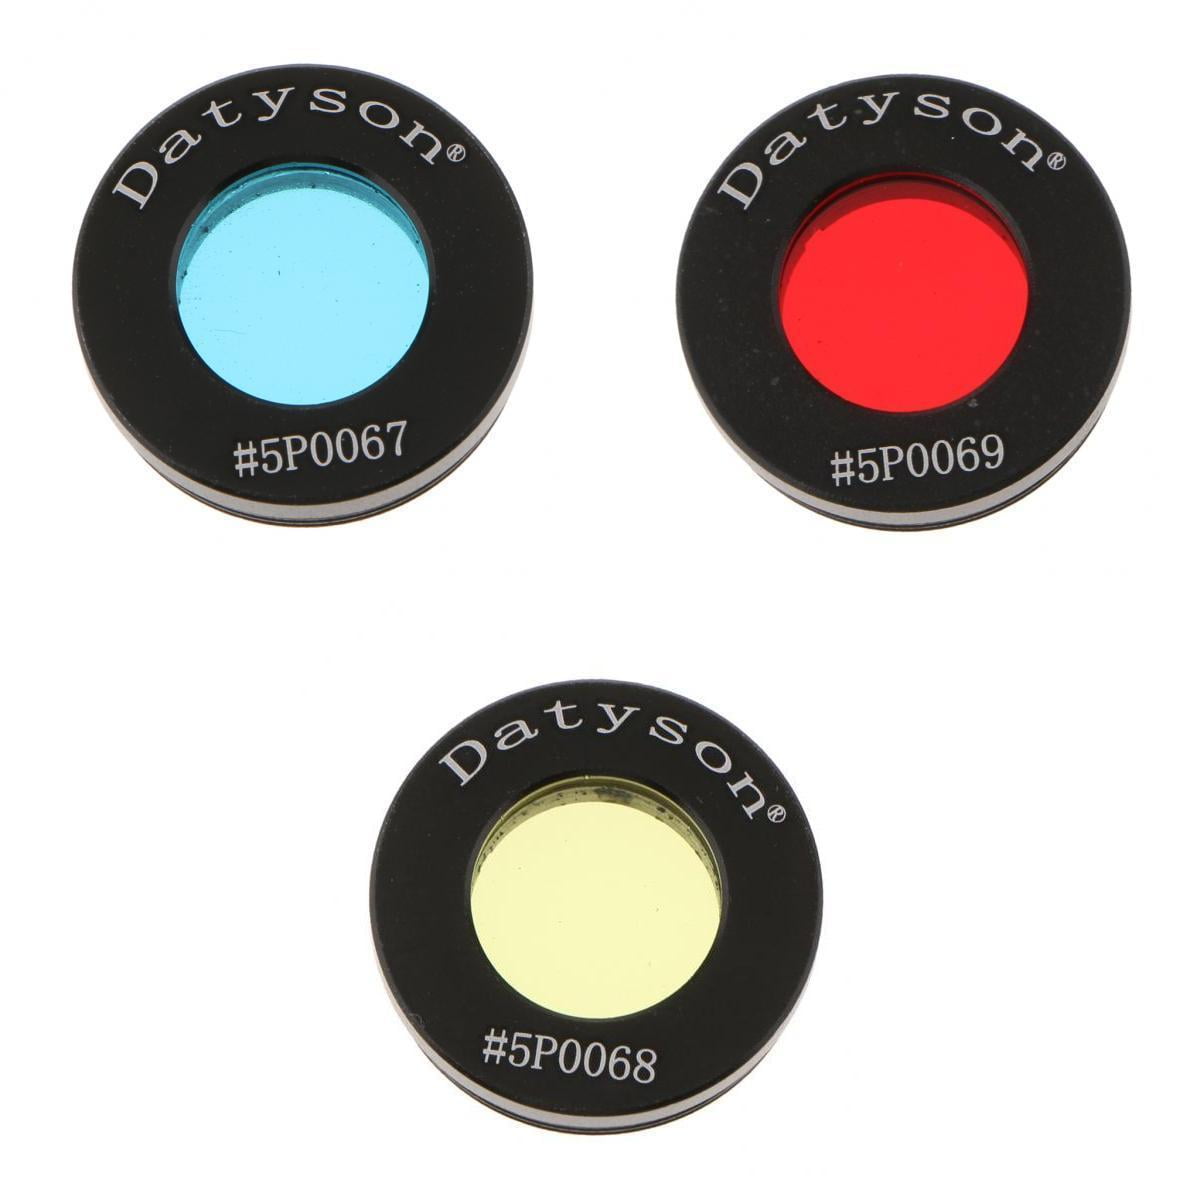 3 Color Filter Blue Red Yellow D DOLITY 0.965 Inch Telescope Filters Set Moon Planet Deep Sky for Eyepiece Accessory Kit 